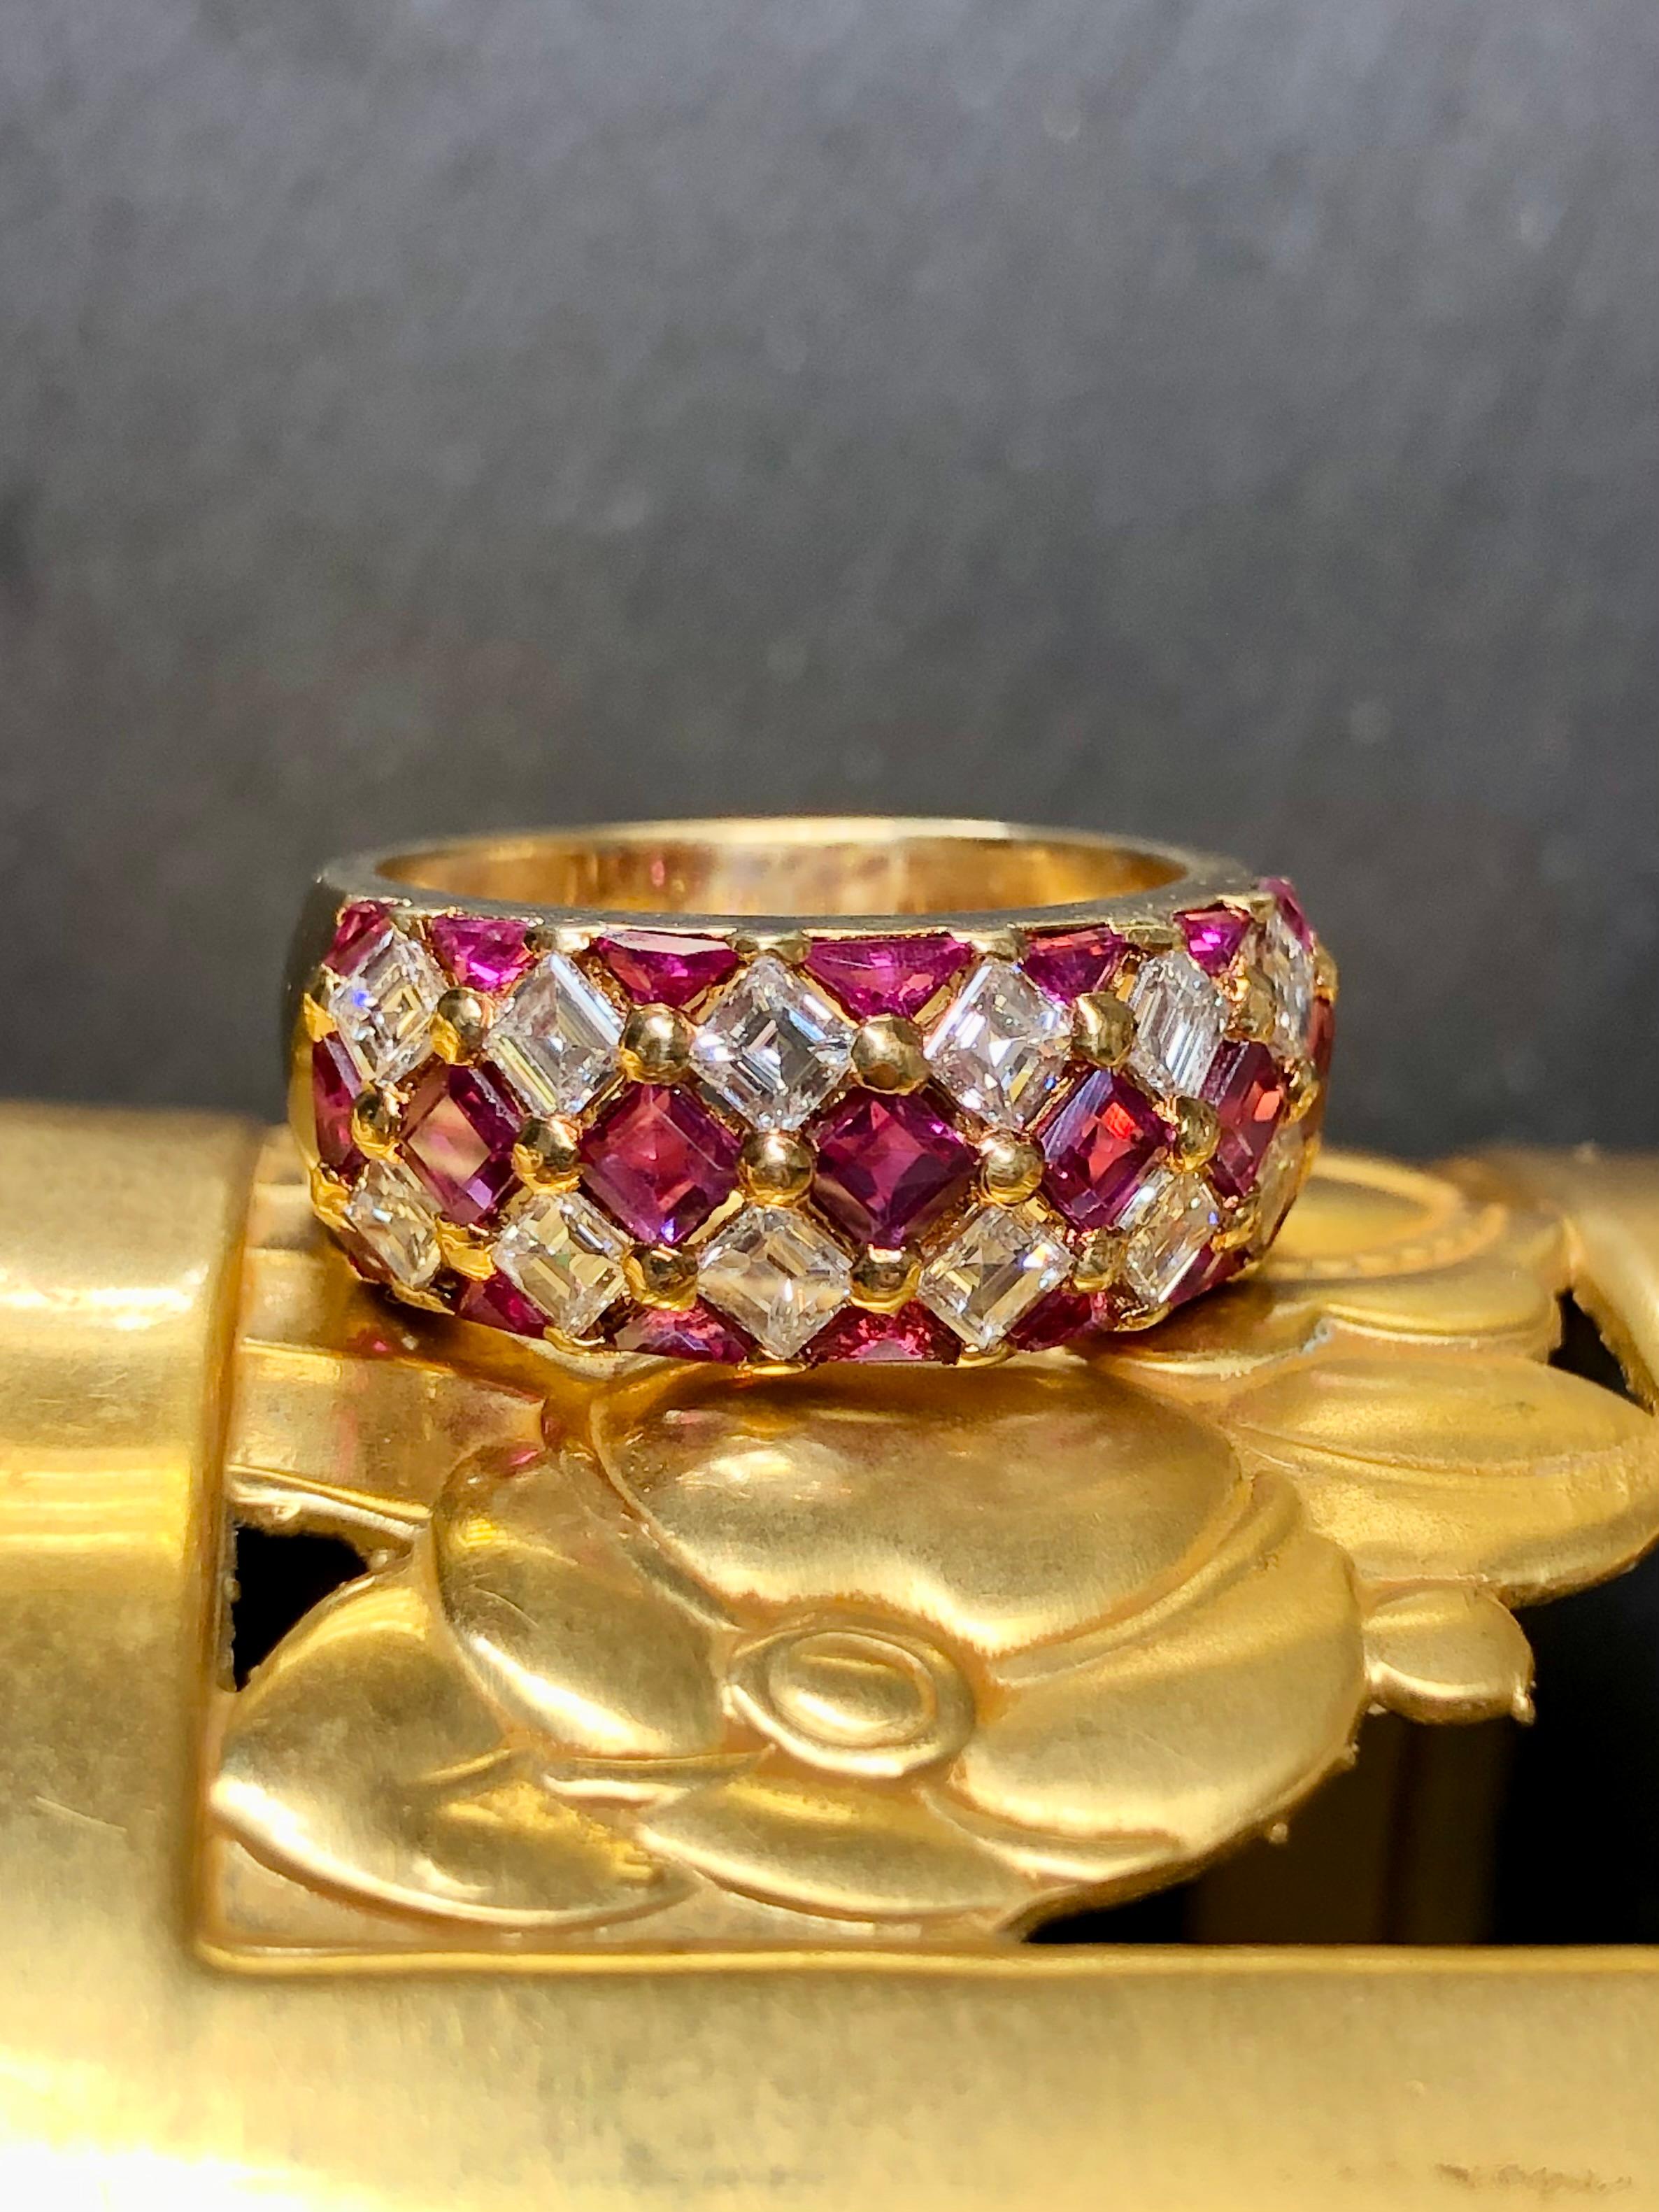 
A gorgeously made ring crafted in 18K yellow gold and set in the shared-prong style with approximately 1.80cttw in beautifully white and clear F-G color and Vs1+ clarity square baguette cut diamonds as well as square and calibrated trilliant